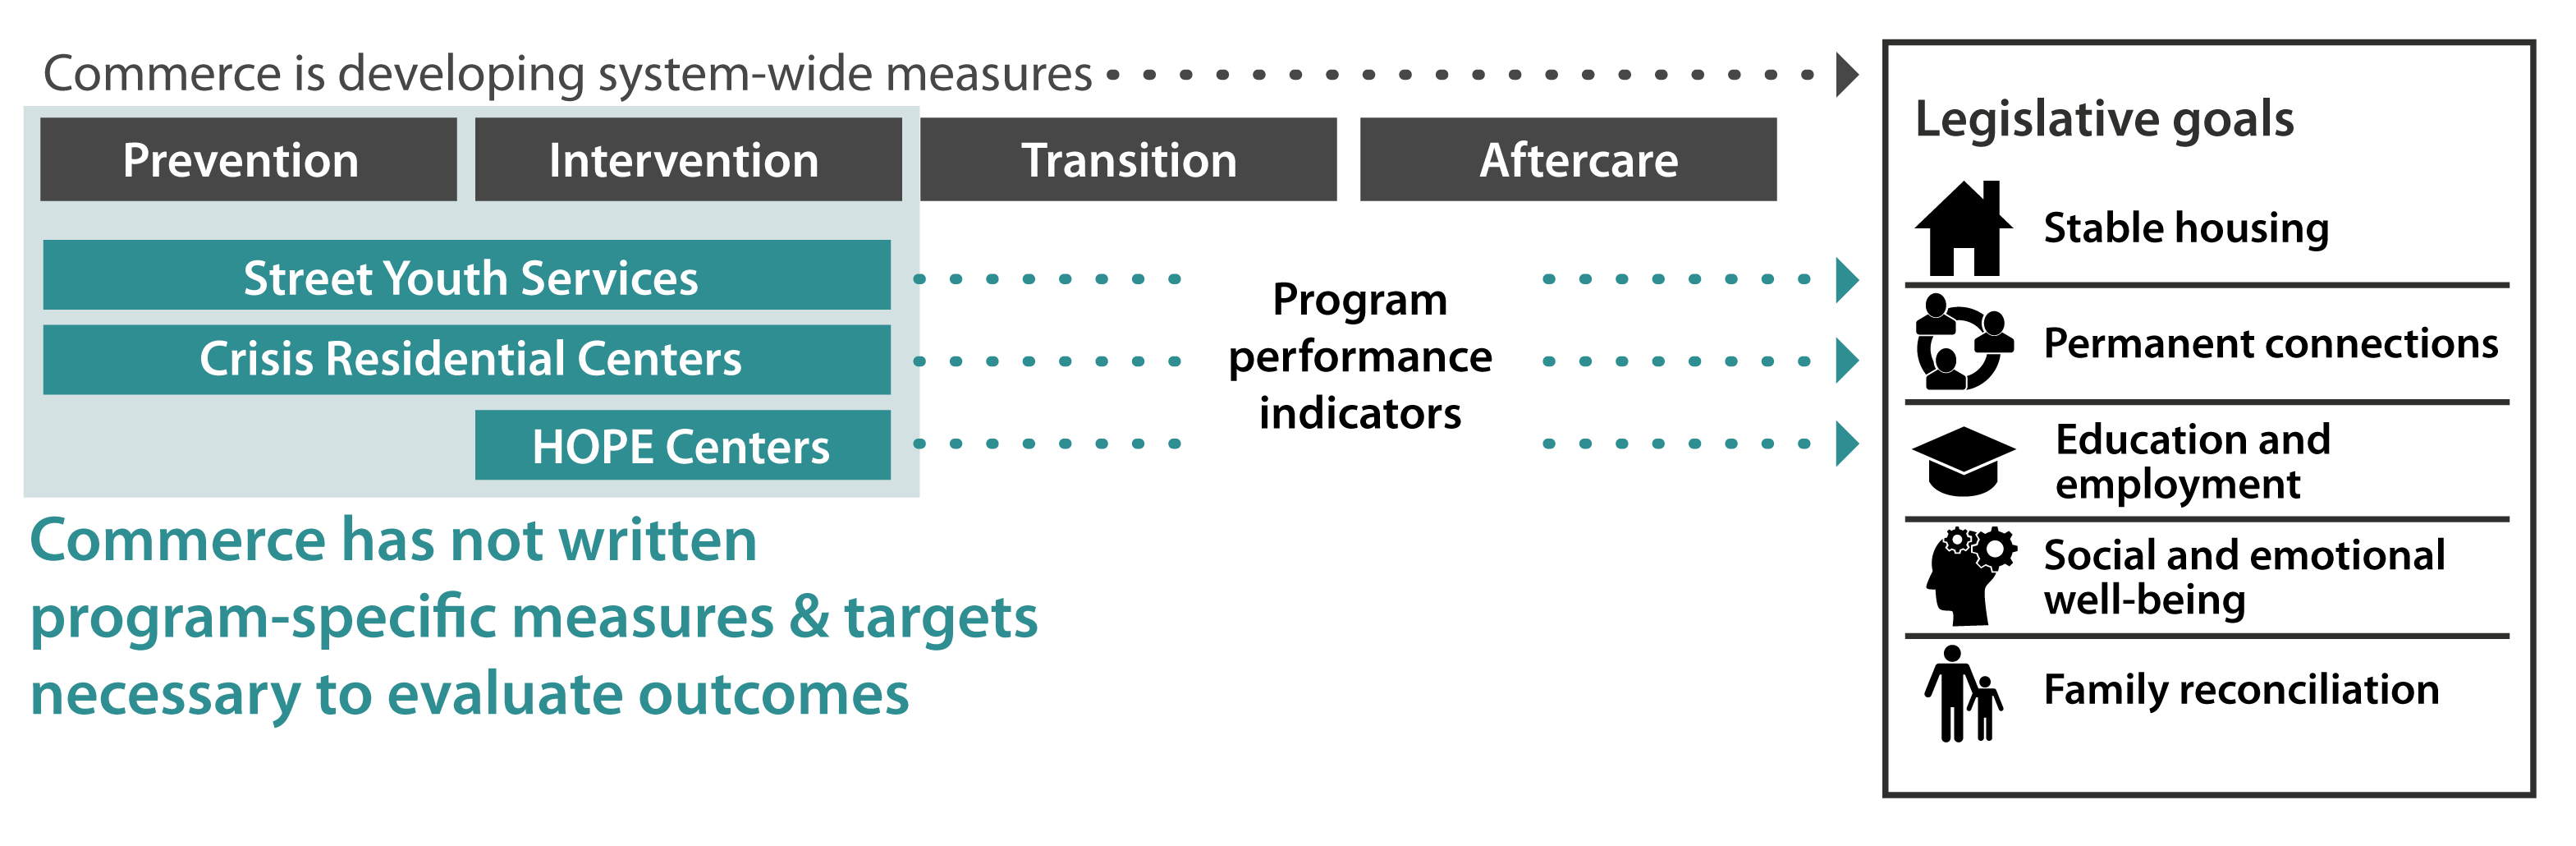 Graphic showing how performance measures are needed to link program outputs to Legislative goals.